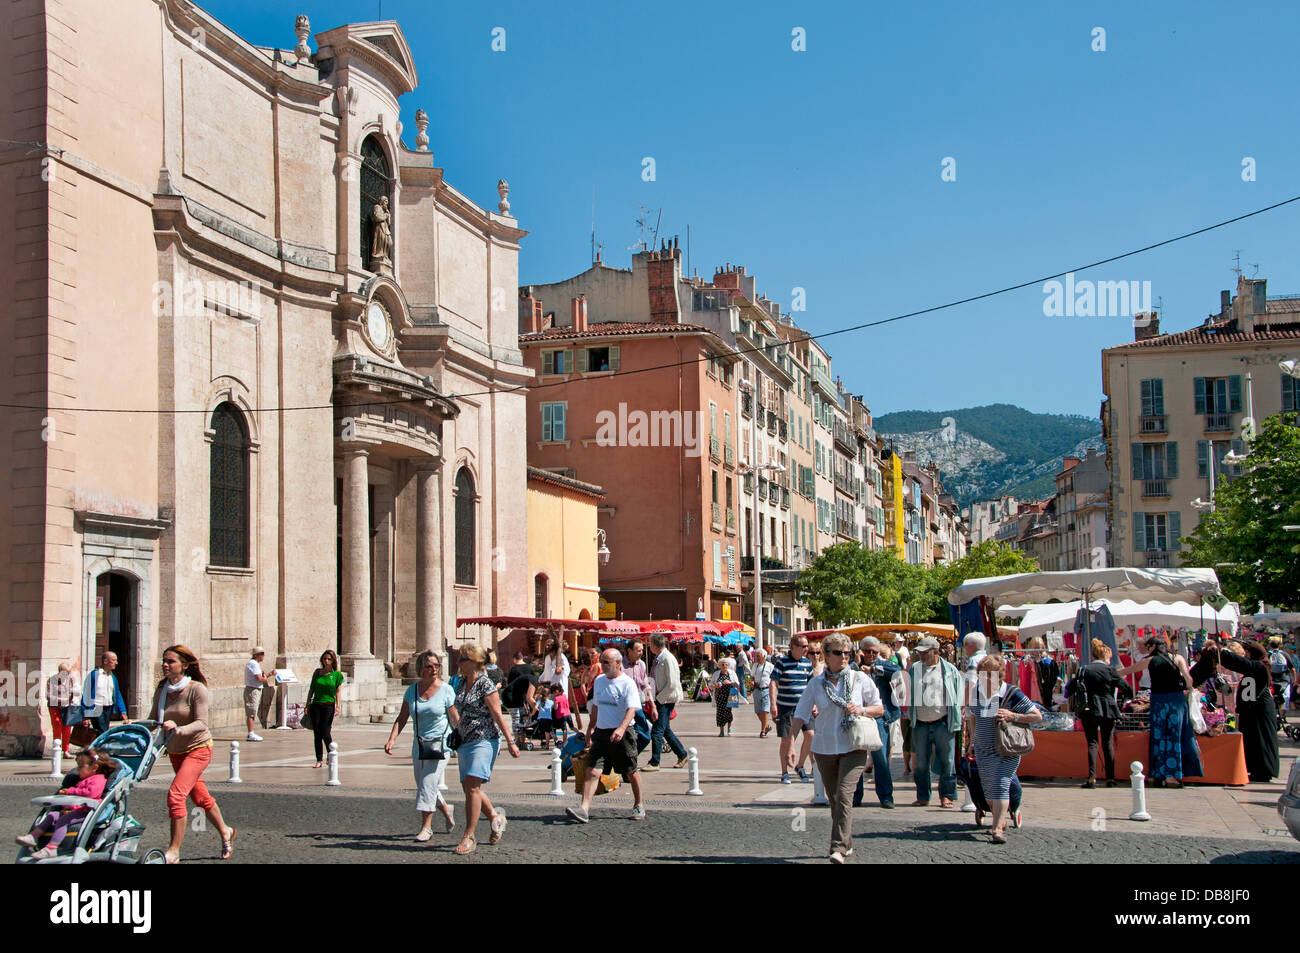 Marche Cours Toulon Farmers Market Open Air Toulon France French Riviera Mediterranean Stock Photo